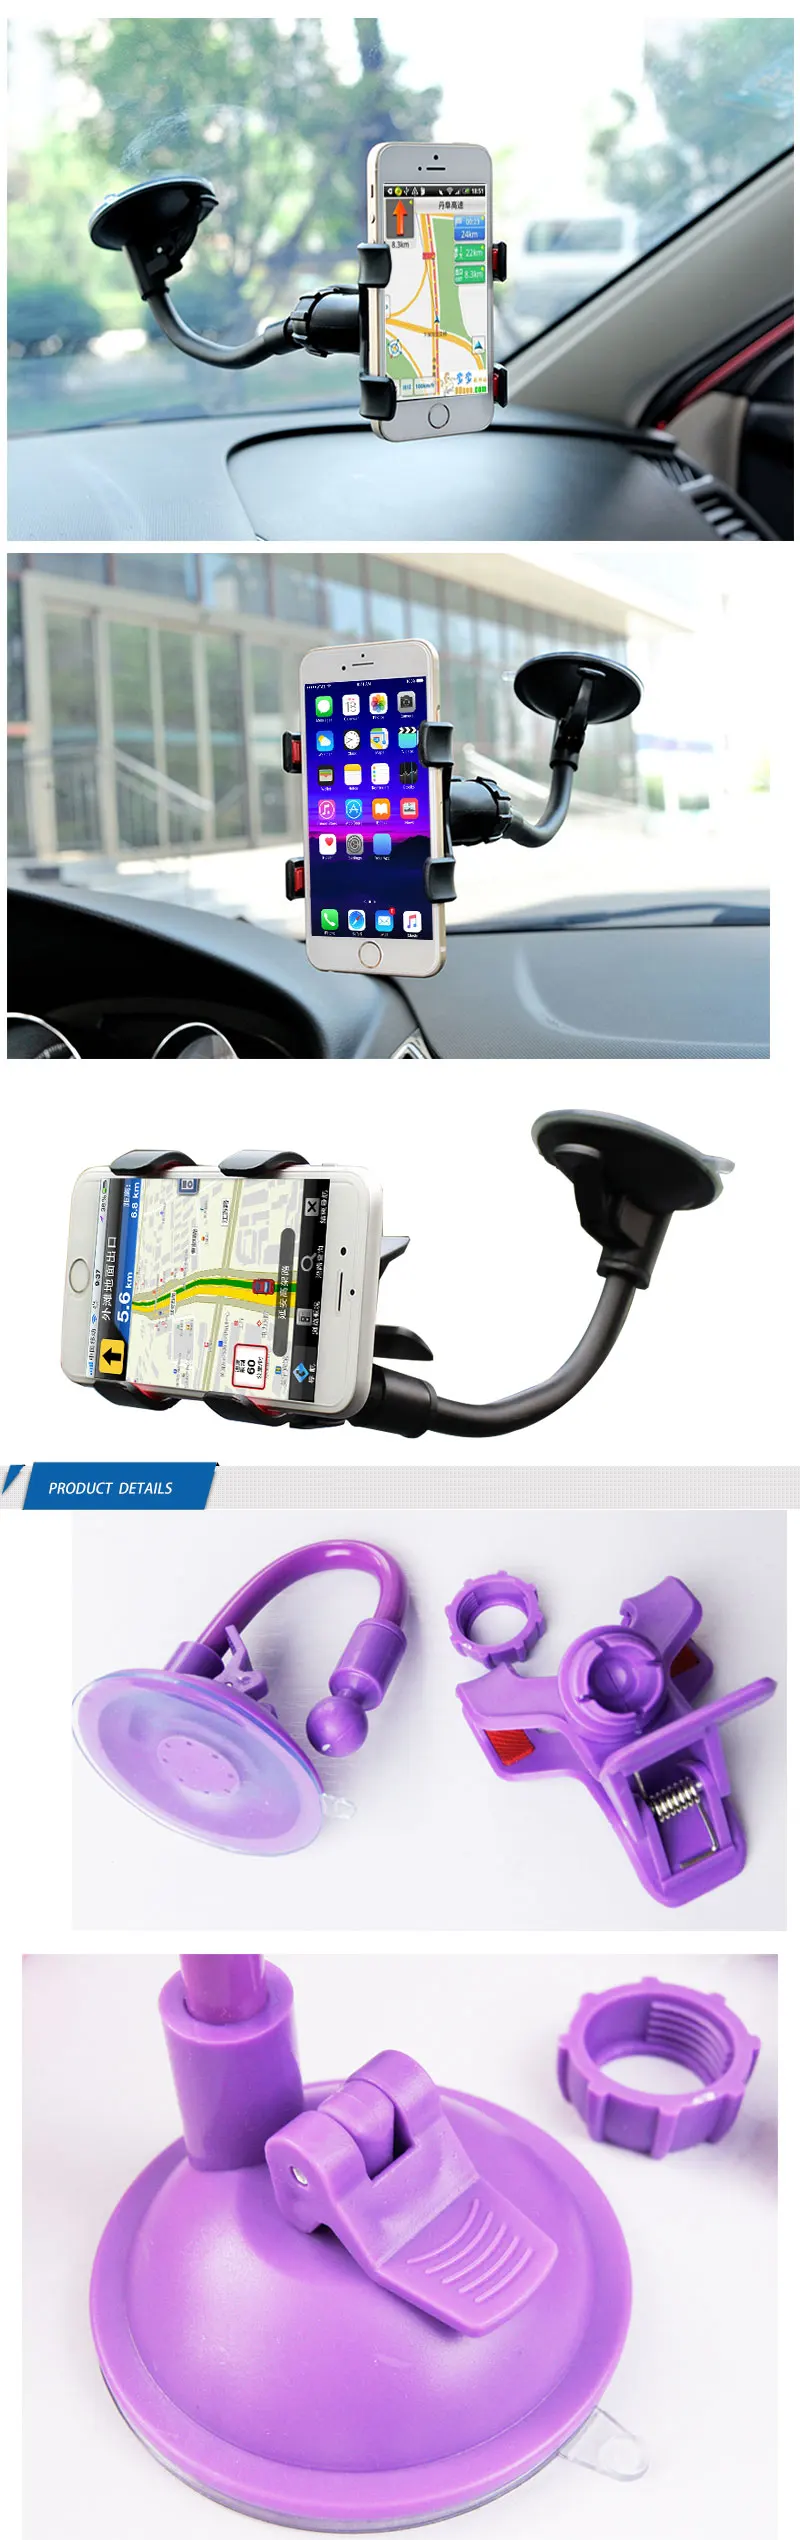 wall mount cell phone holder